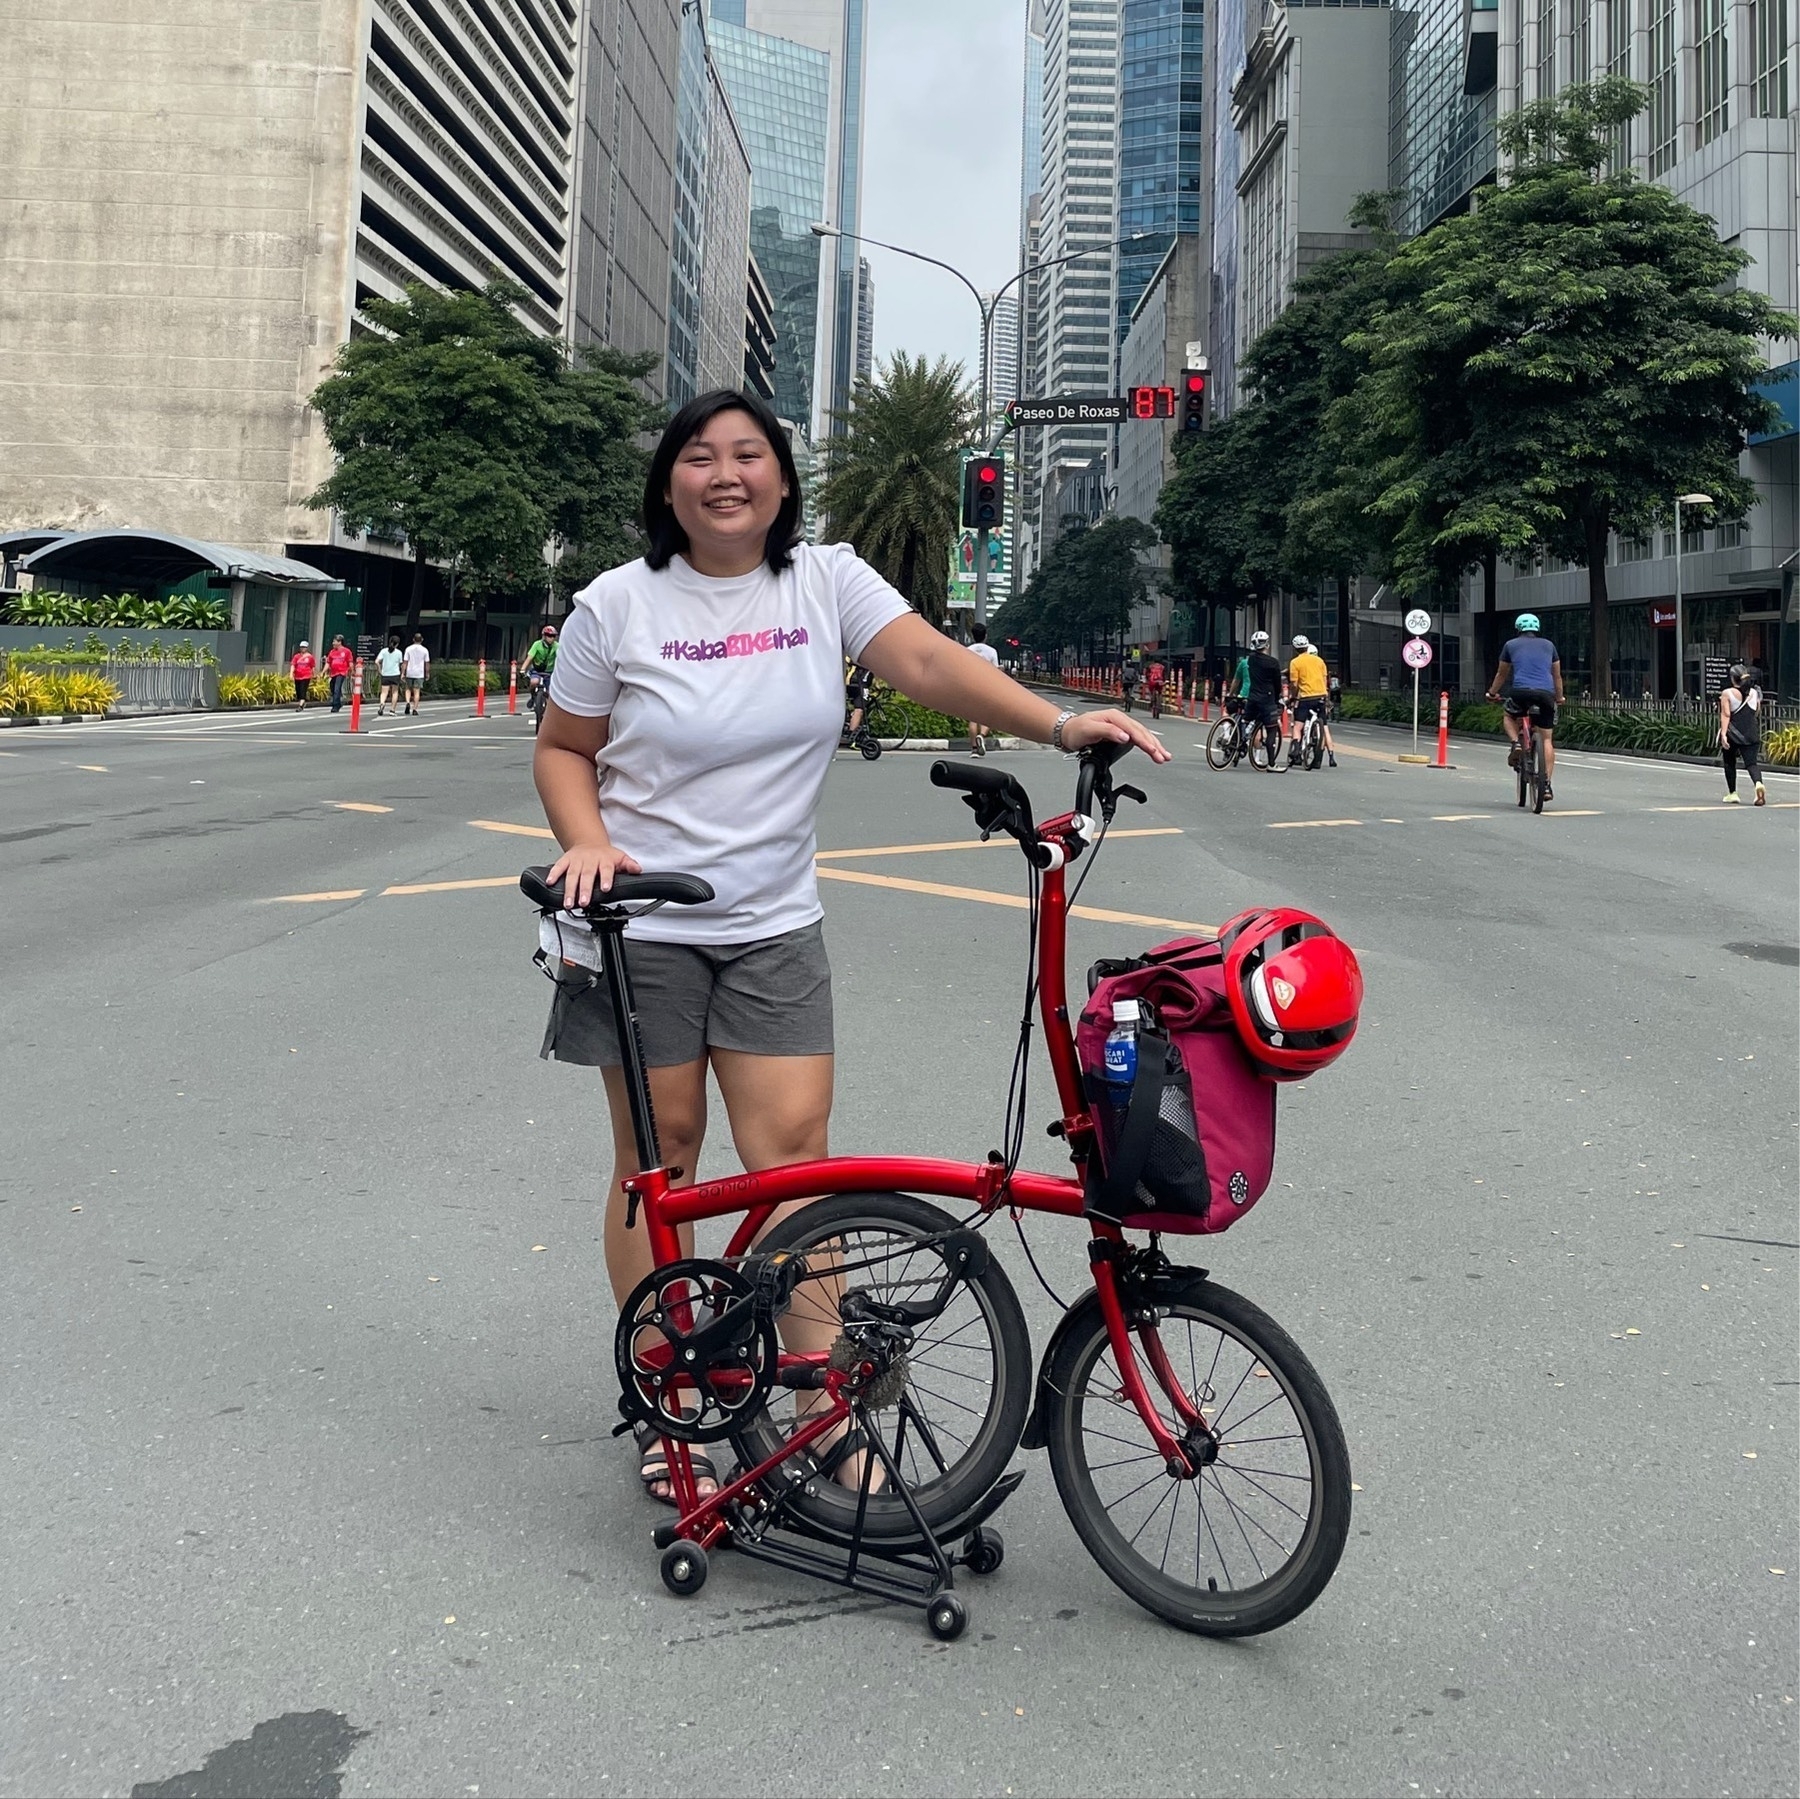 Chi smiling and posing with her red Banian trifold bike, which is partially folded, while in the middle of Ayala Avenue because it's a Car-Free Sunday morning event. She is wearing a white t-shirt that has the text, "#KabaBIKEihan" printed, and gray shorts and black sandals. On her bike, her red GoFar front mounted bag is attached, and her red Lumos helmet is also strapped to her bag.